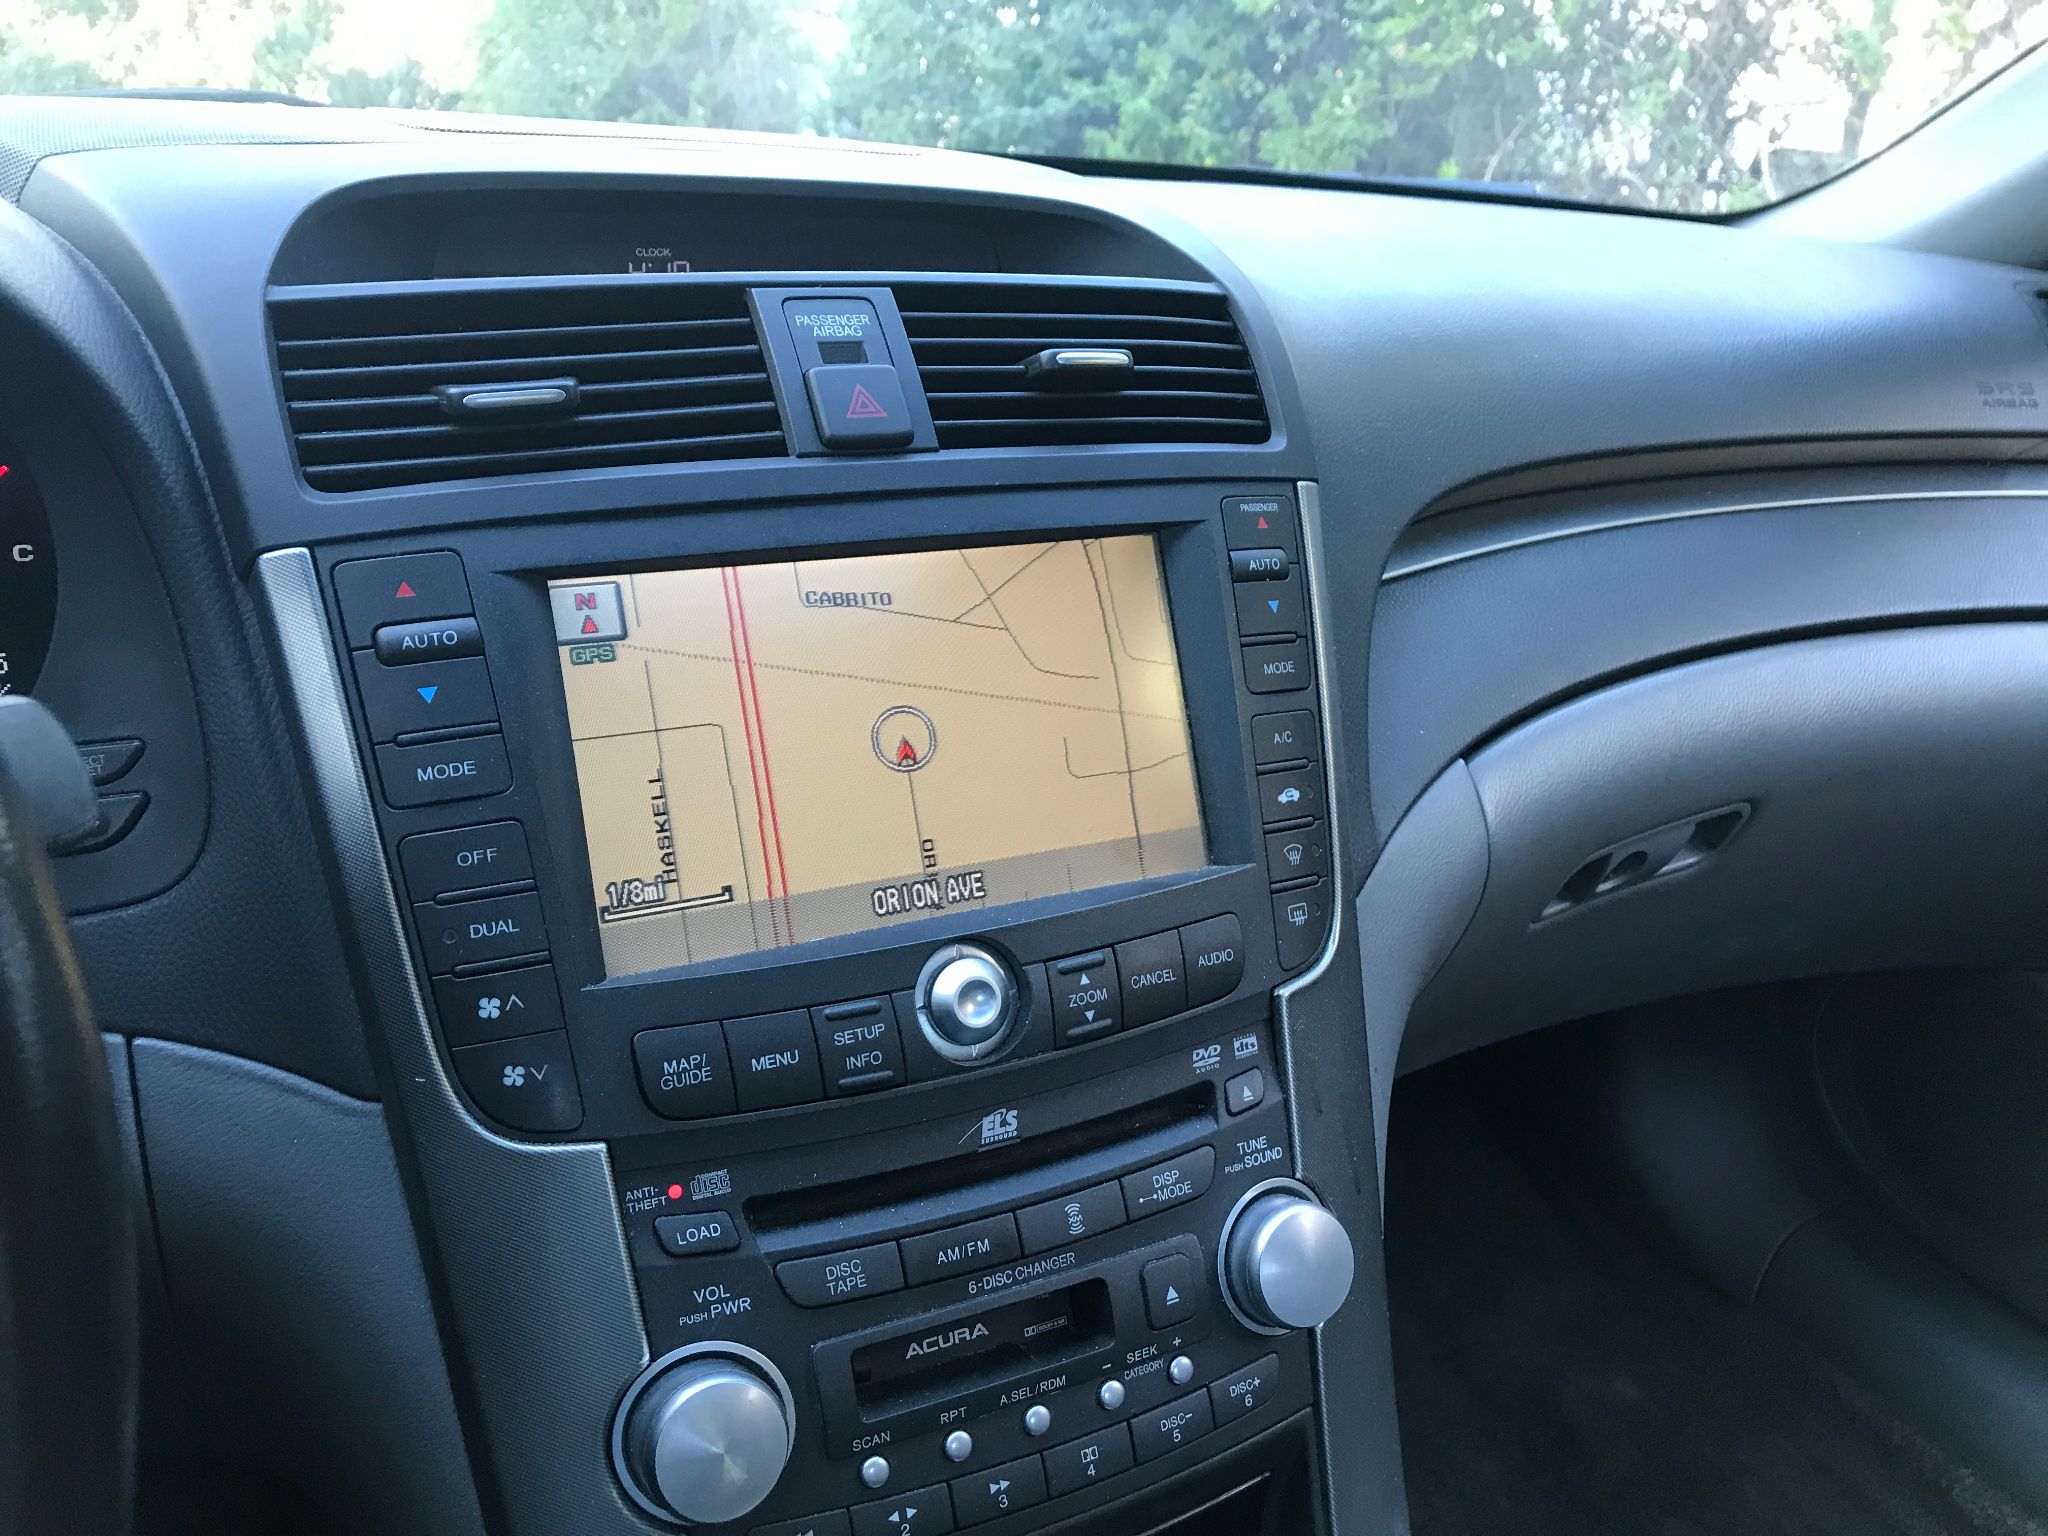 Used 2006 Acura Tl Navigation System At City Cars Warehouse Inc